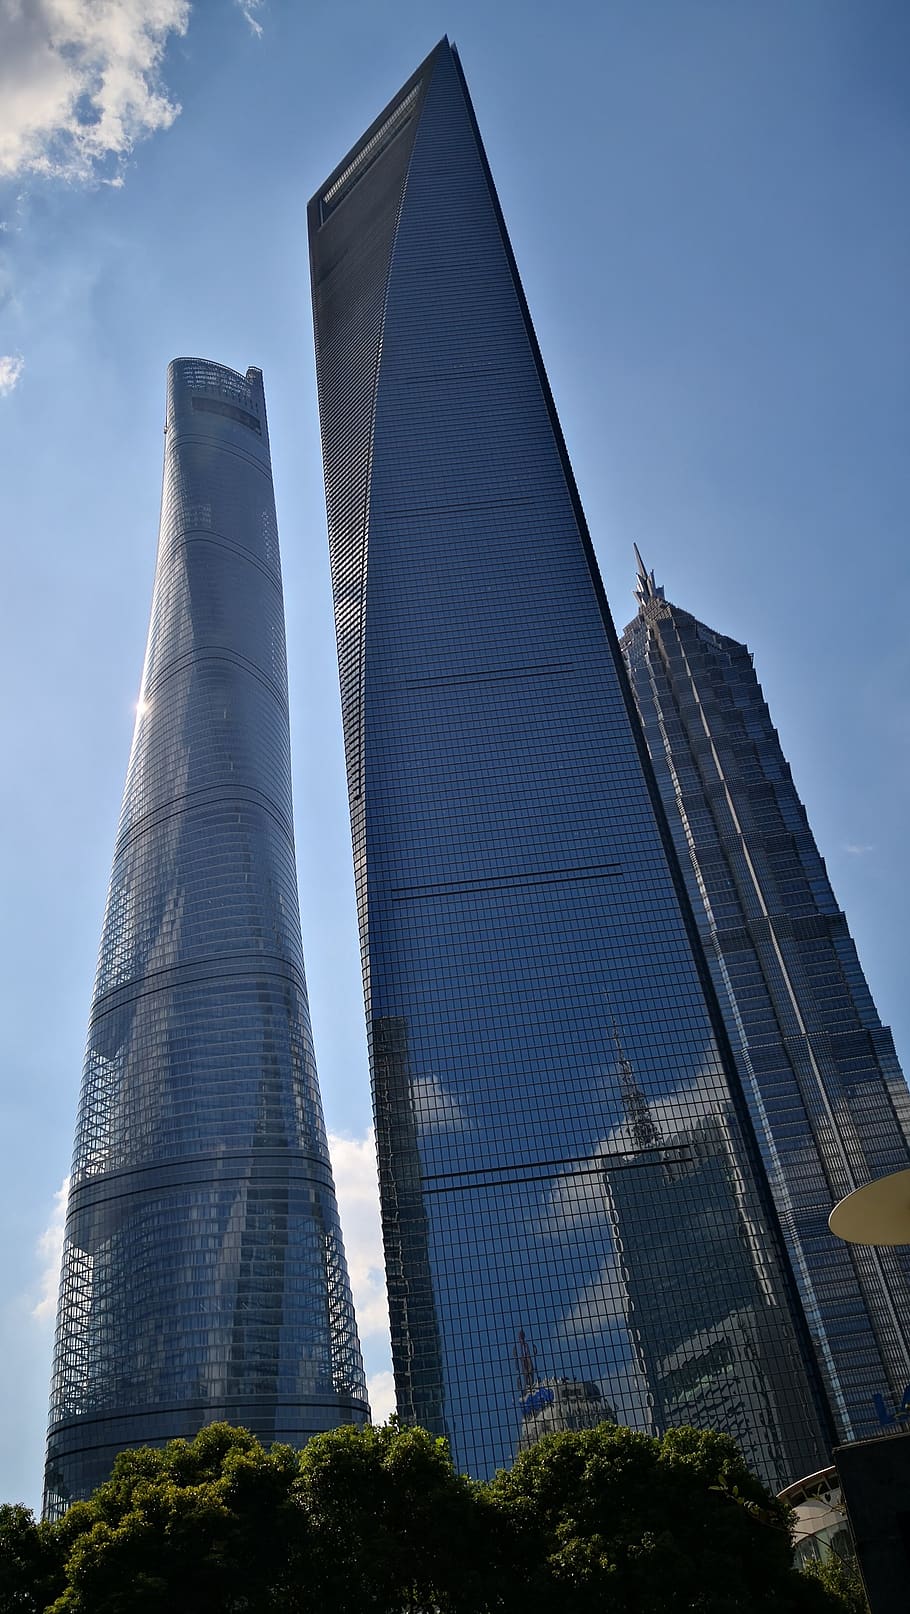 shanghai, skyscraper, building, architecture, built structure, building exterior, tall - high, sky, office building exterior, office